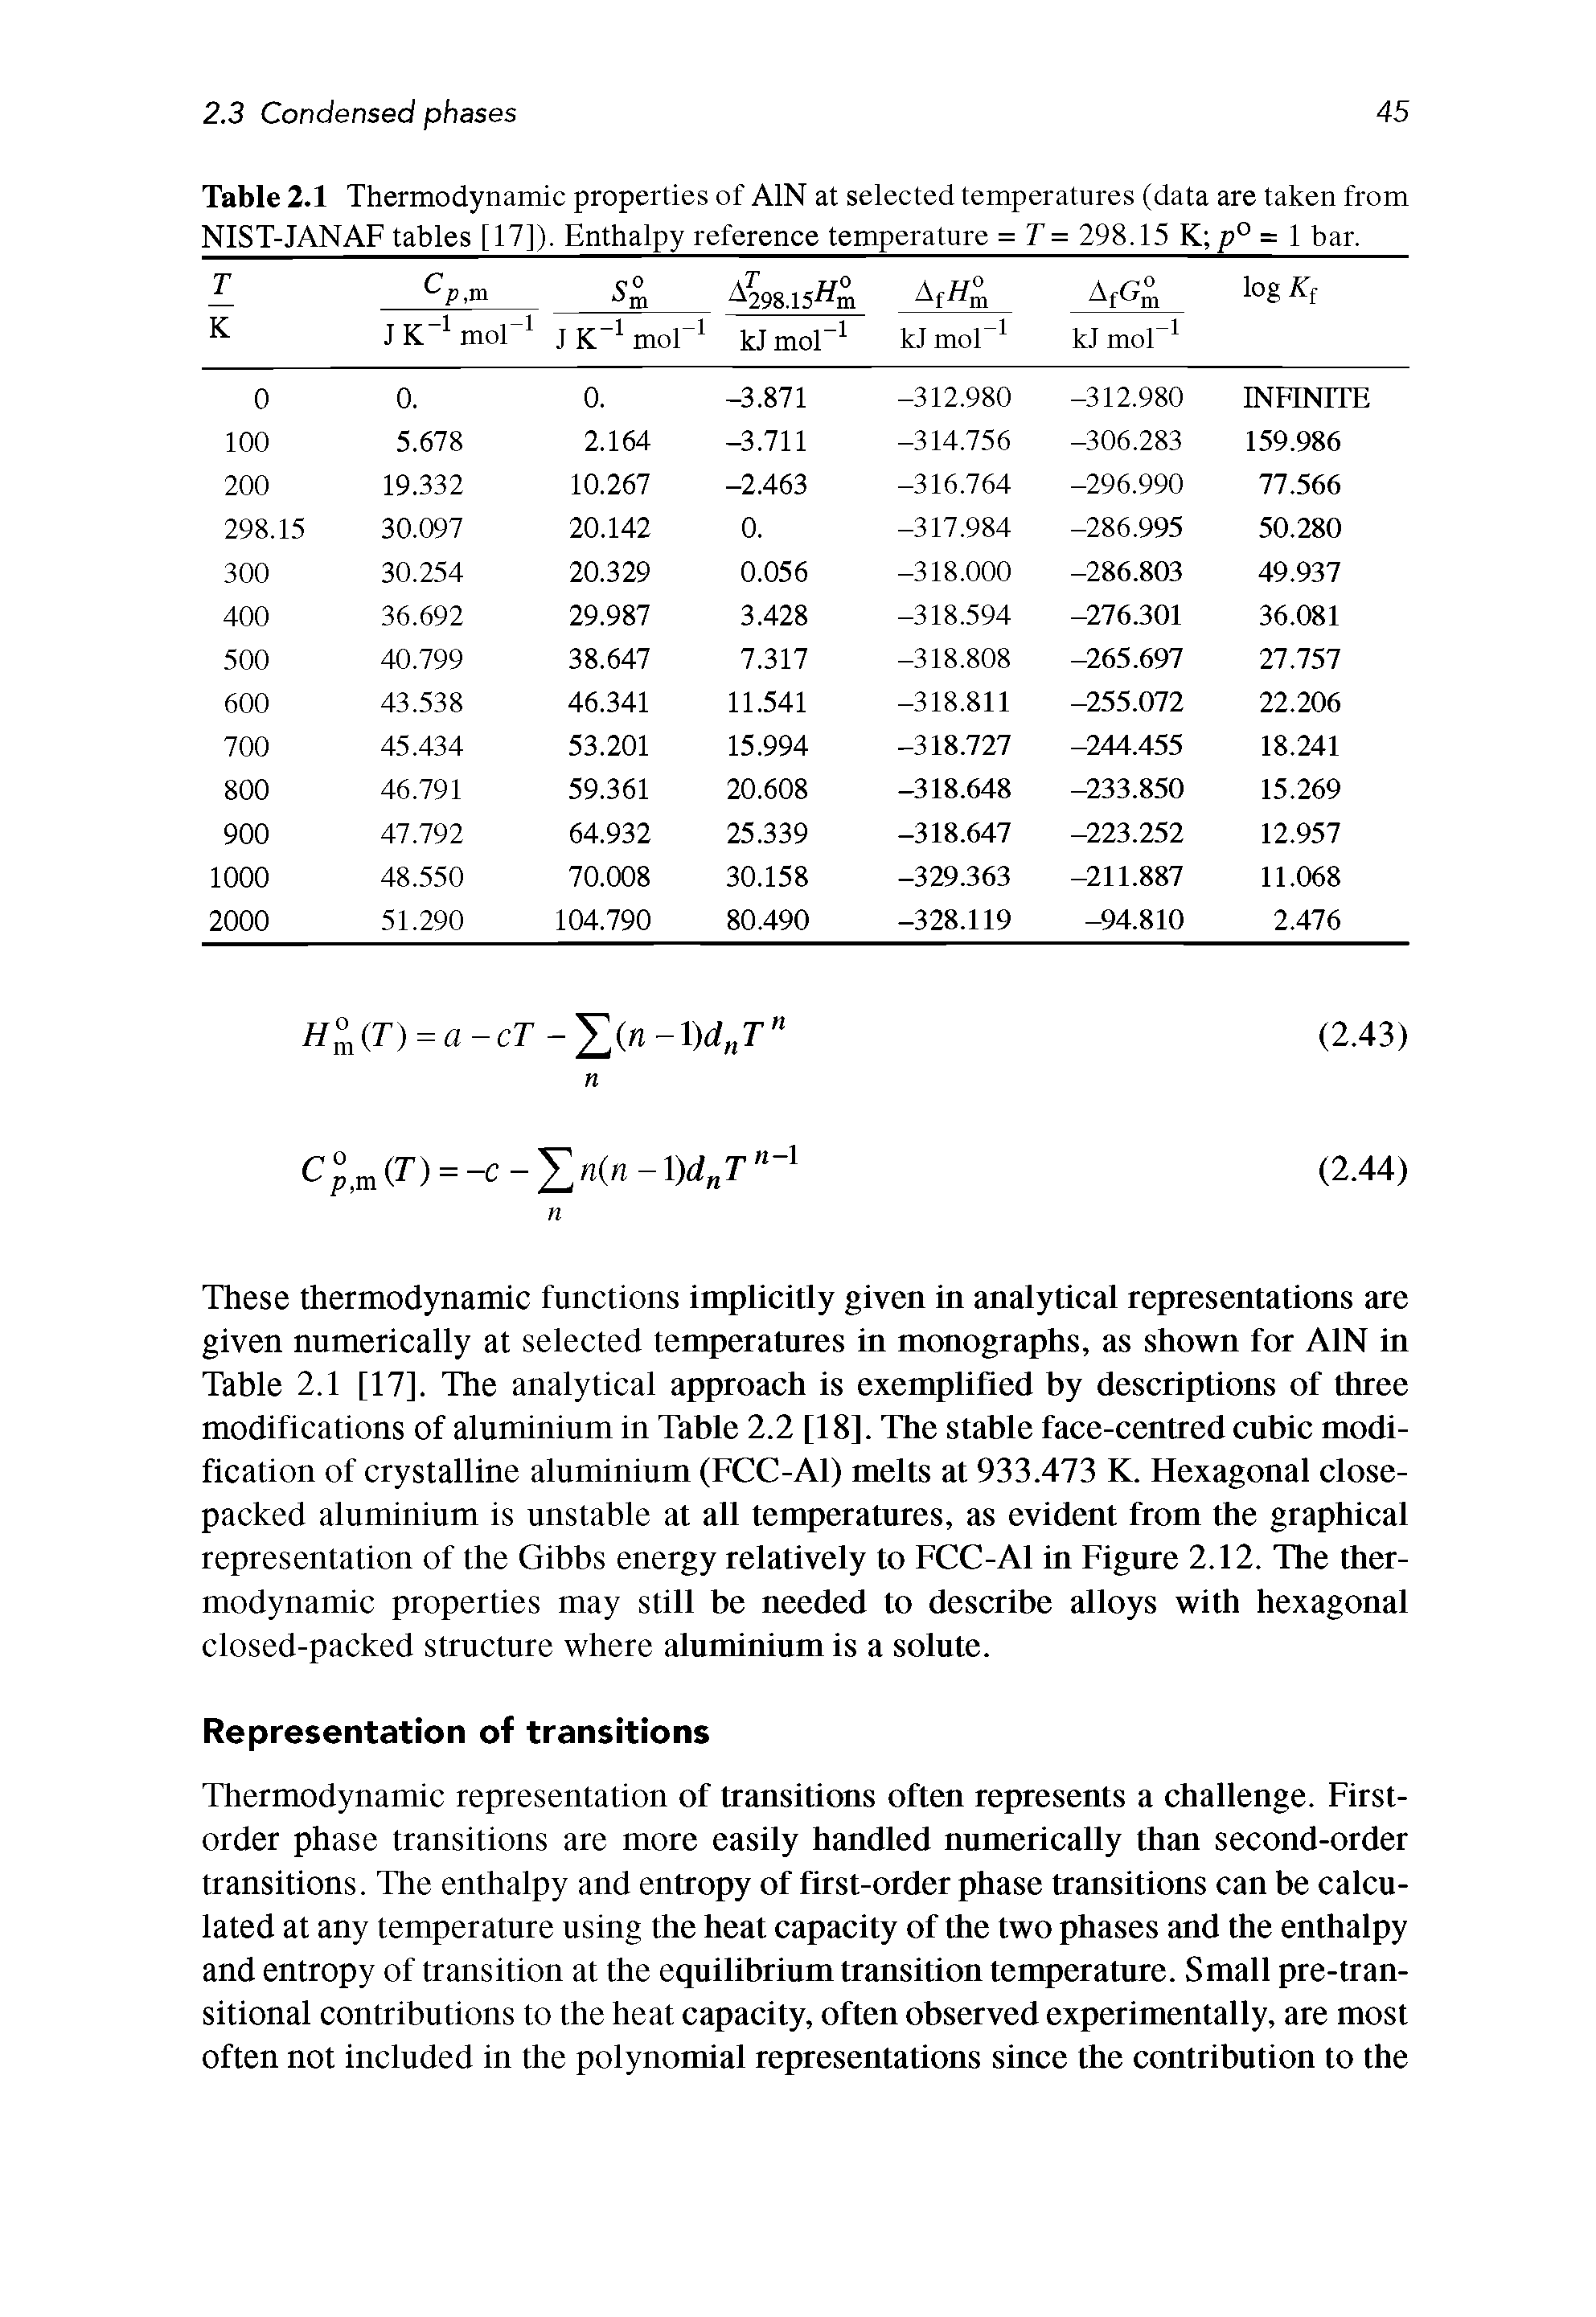 Table 2.1 Thermodynamic properties of AIN at selected temperatures (data are taken from NIST-JANAF tables [17]). Enthalpy reference temperature = T = 298.15 K p° = 1 bar.